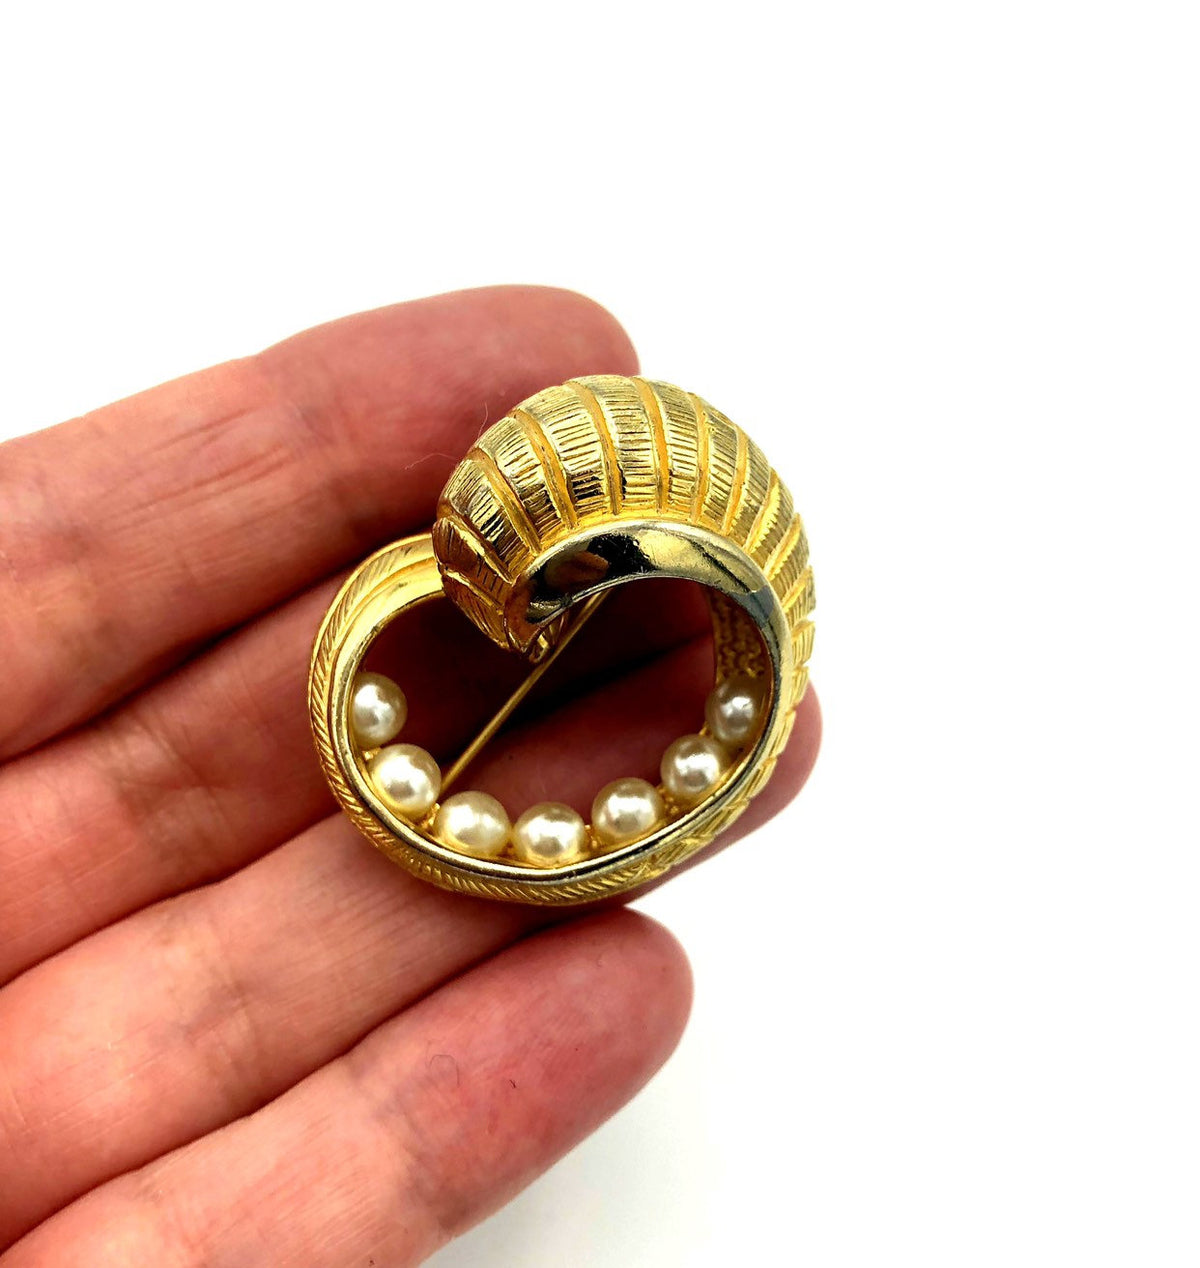 Gold Swirl Vintage Castlecliff Classic Pearl Brooch-Sustainable Fashion with Vintage Style-Trending Designer Fashion-24 Wishes